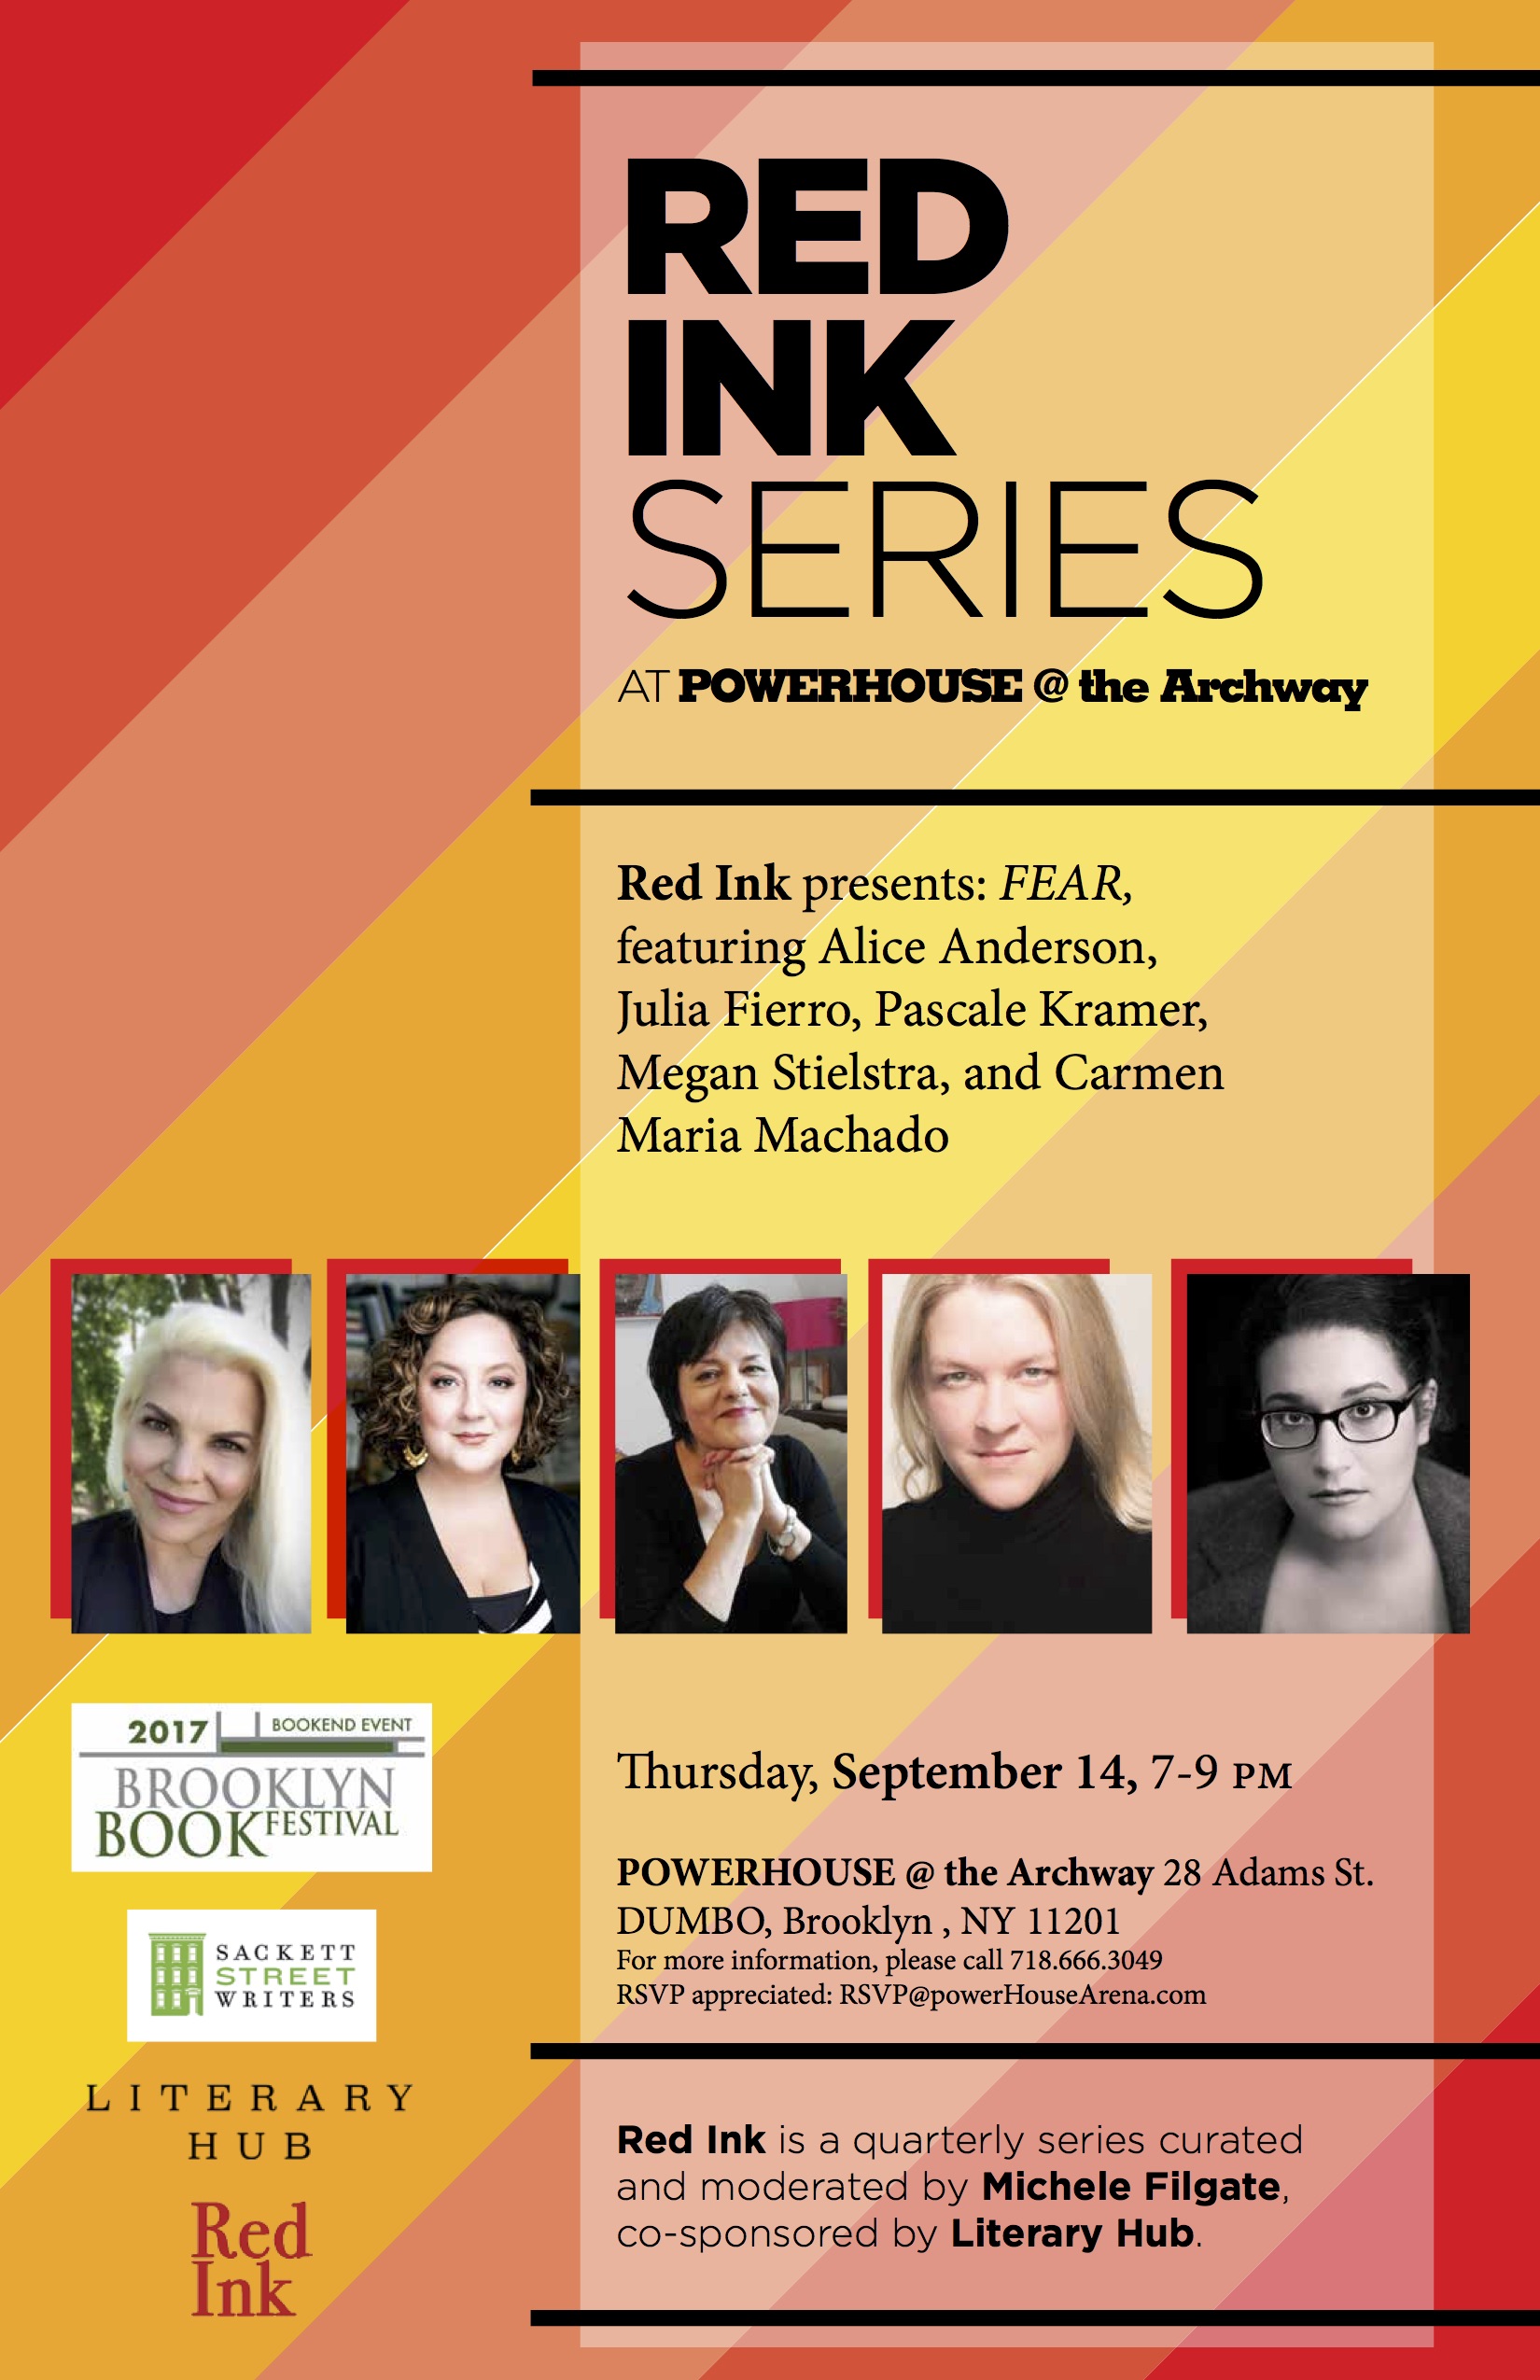 Red Ink Series: FEAR, hosted by Michele Filgate with Alice Anderson, Julia Fierro, Pascale Kramer, Megan Stielstra and Carmen Maria Machado